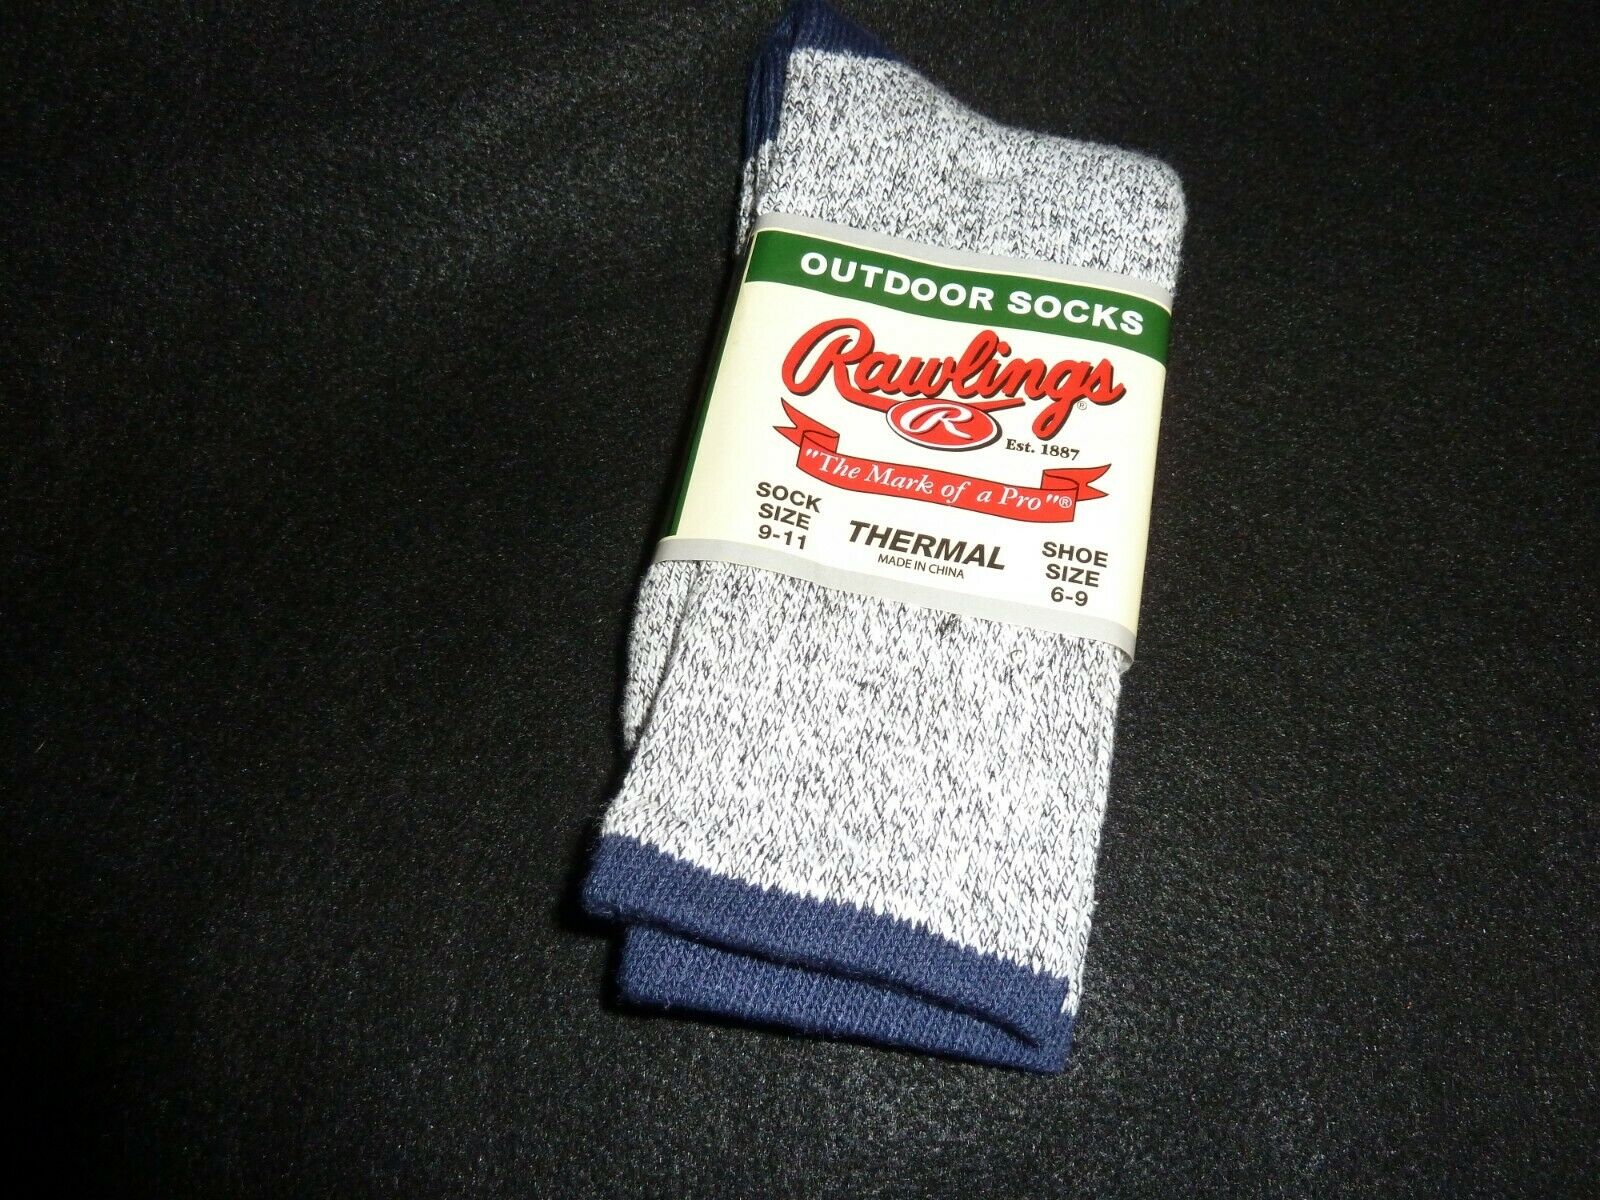 Rawlings Thermal Outdoor Socks Womens Sock 9-11 Recycled Cotton New